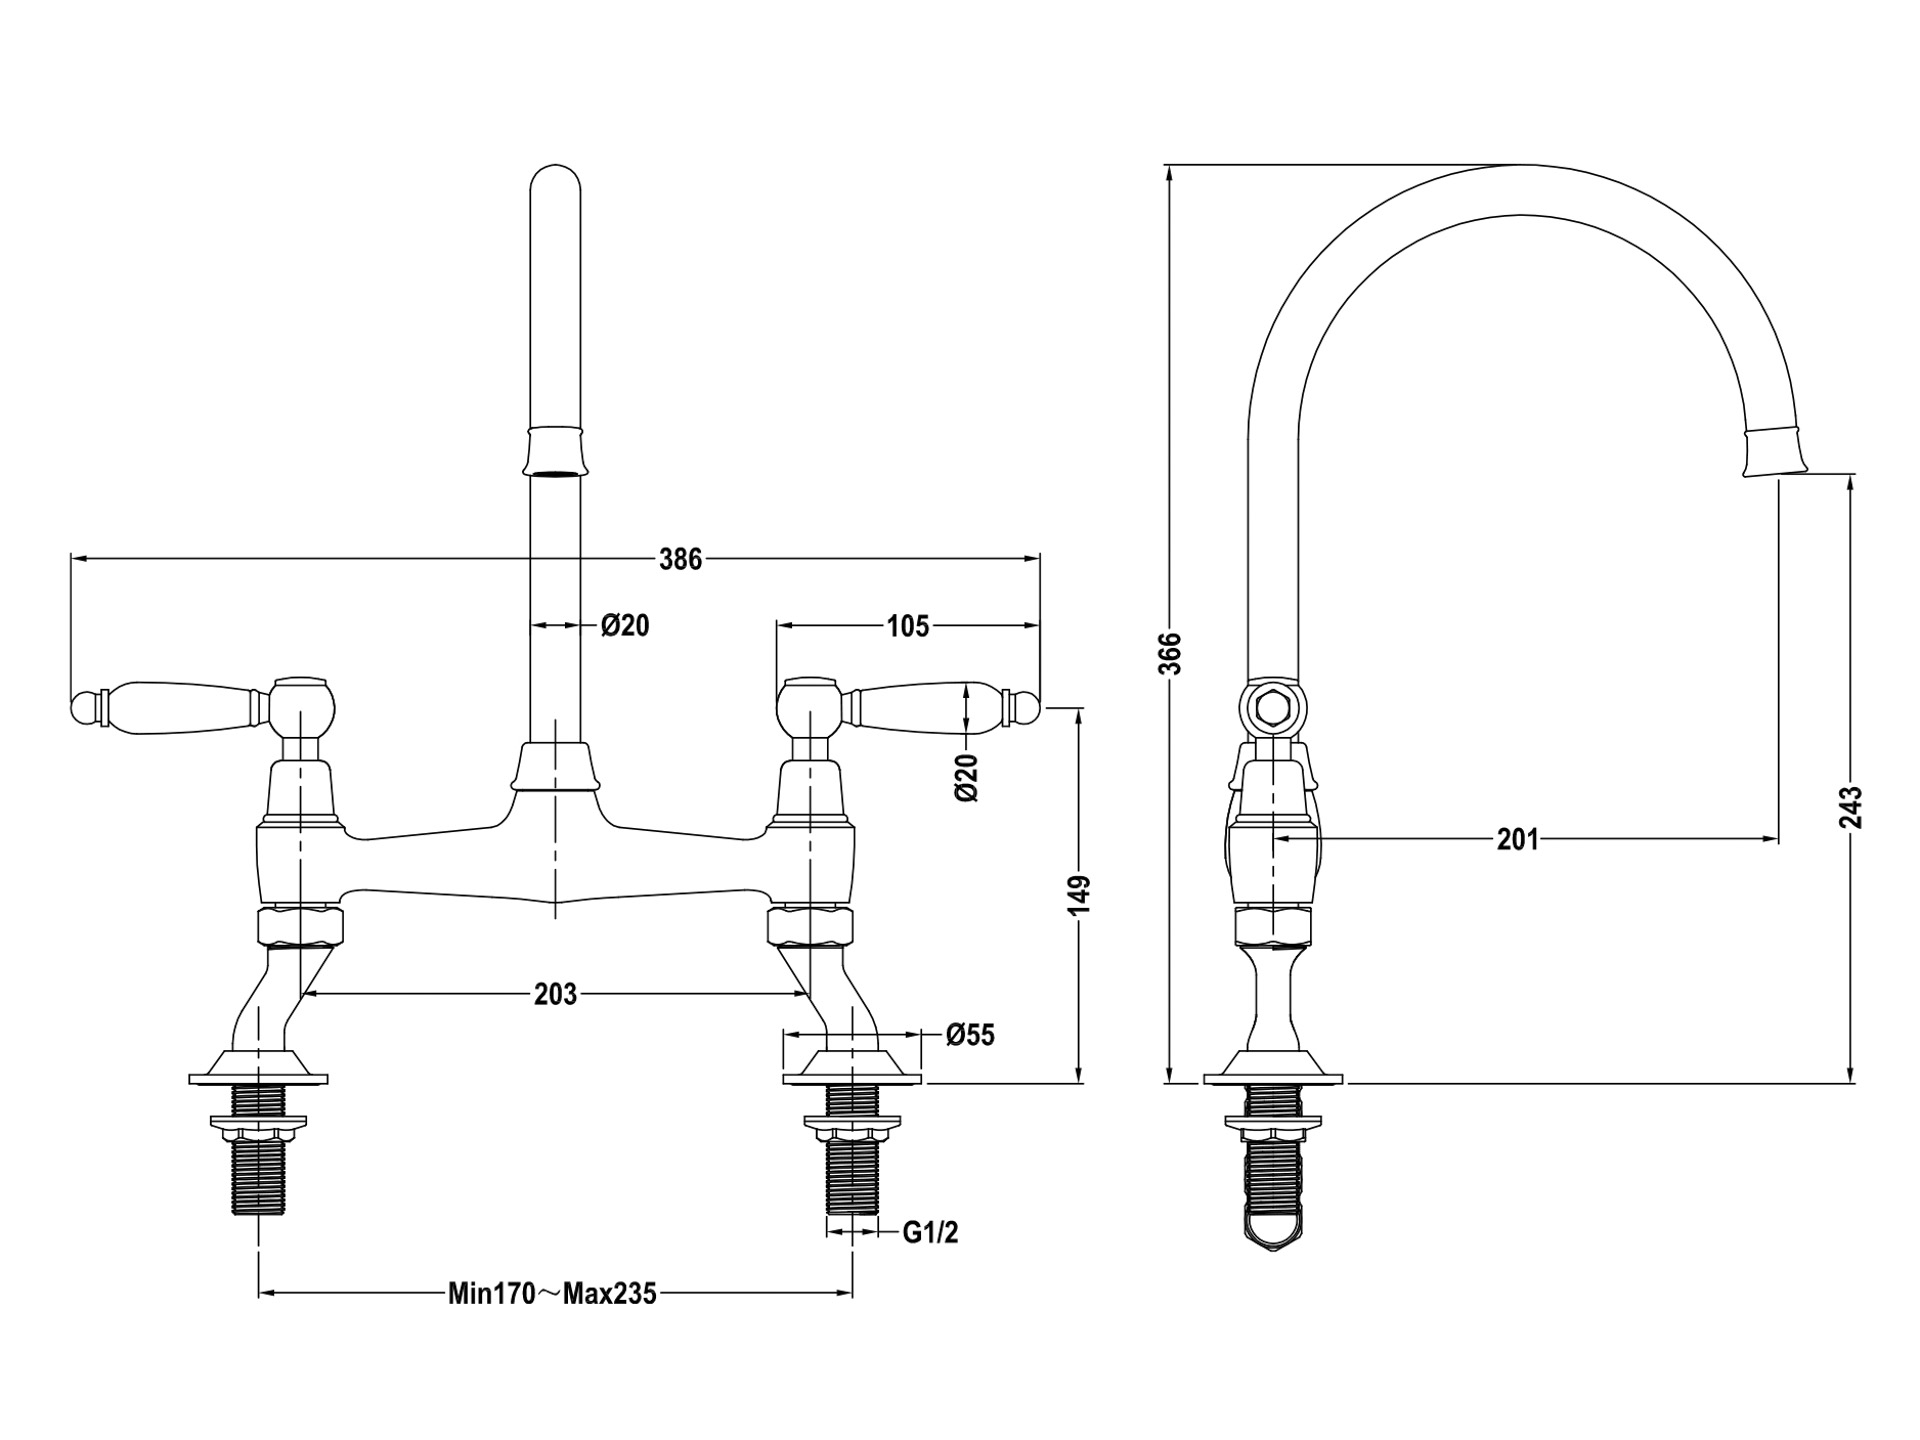 The 1810 Company Moulins tap technical spec